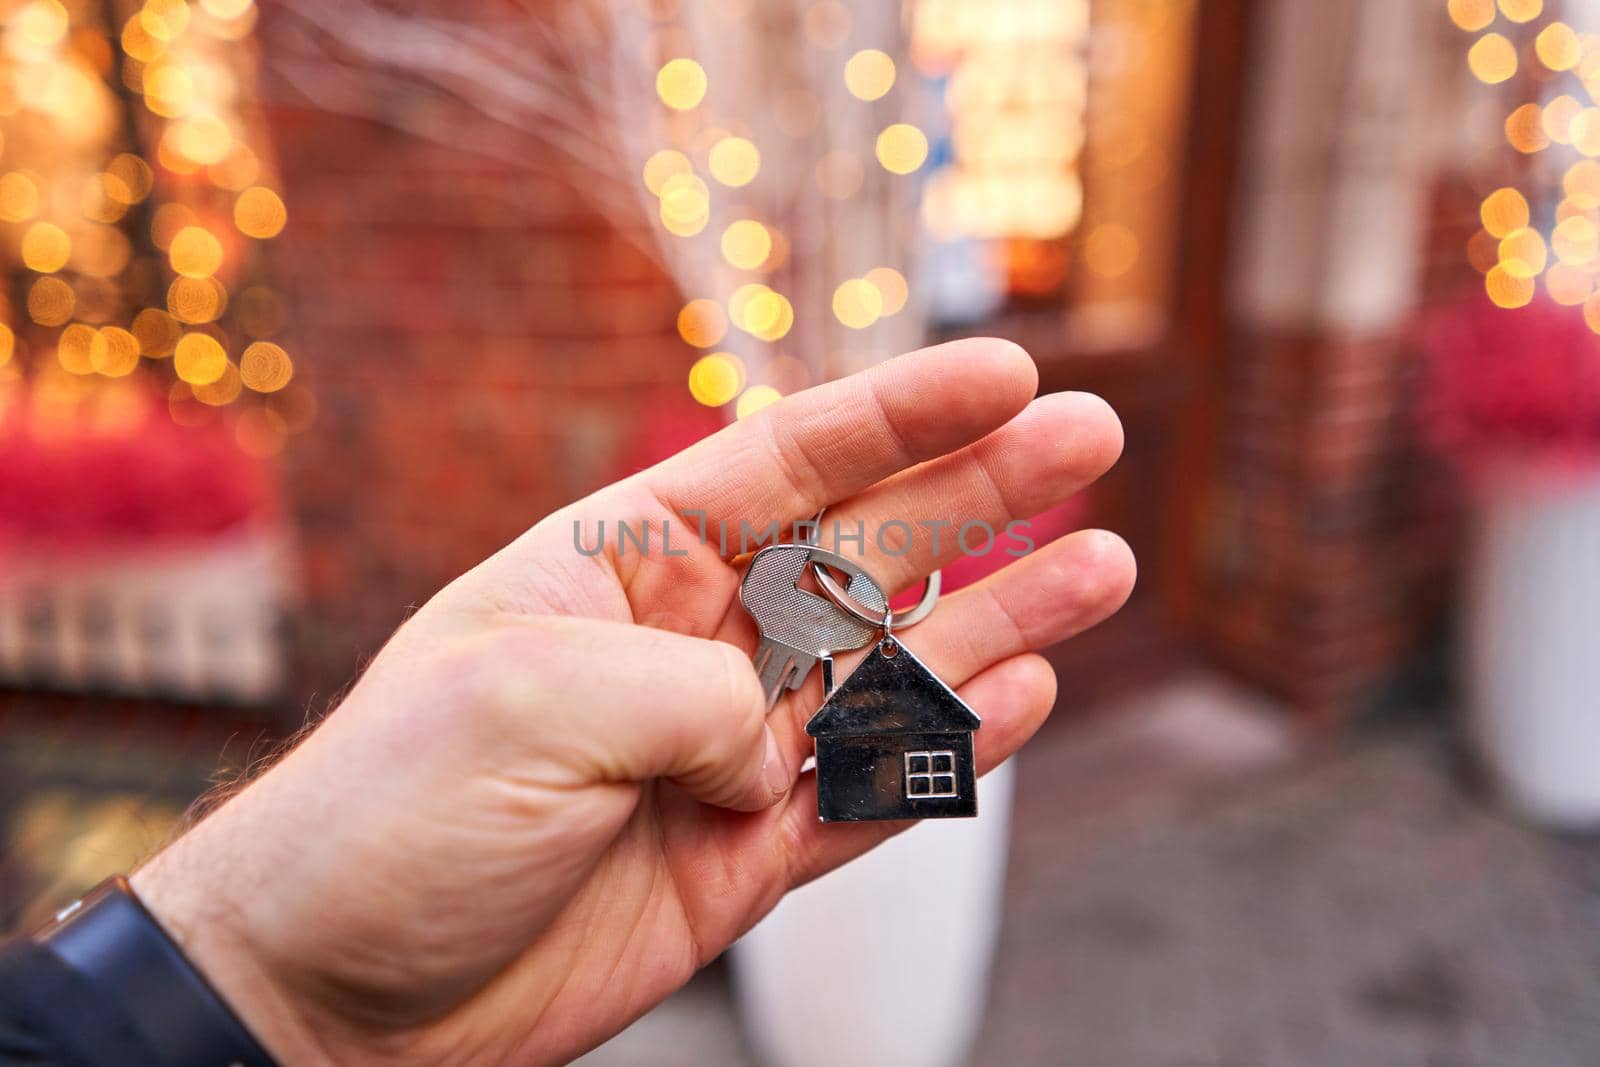 Rent a house for Christmas. Mortgage or rent concept. Man holding key with wooden house keychain . Real estate, hypothec, moving home or renting property. Christmas mood in blurred background